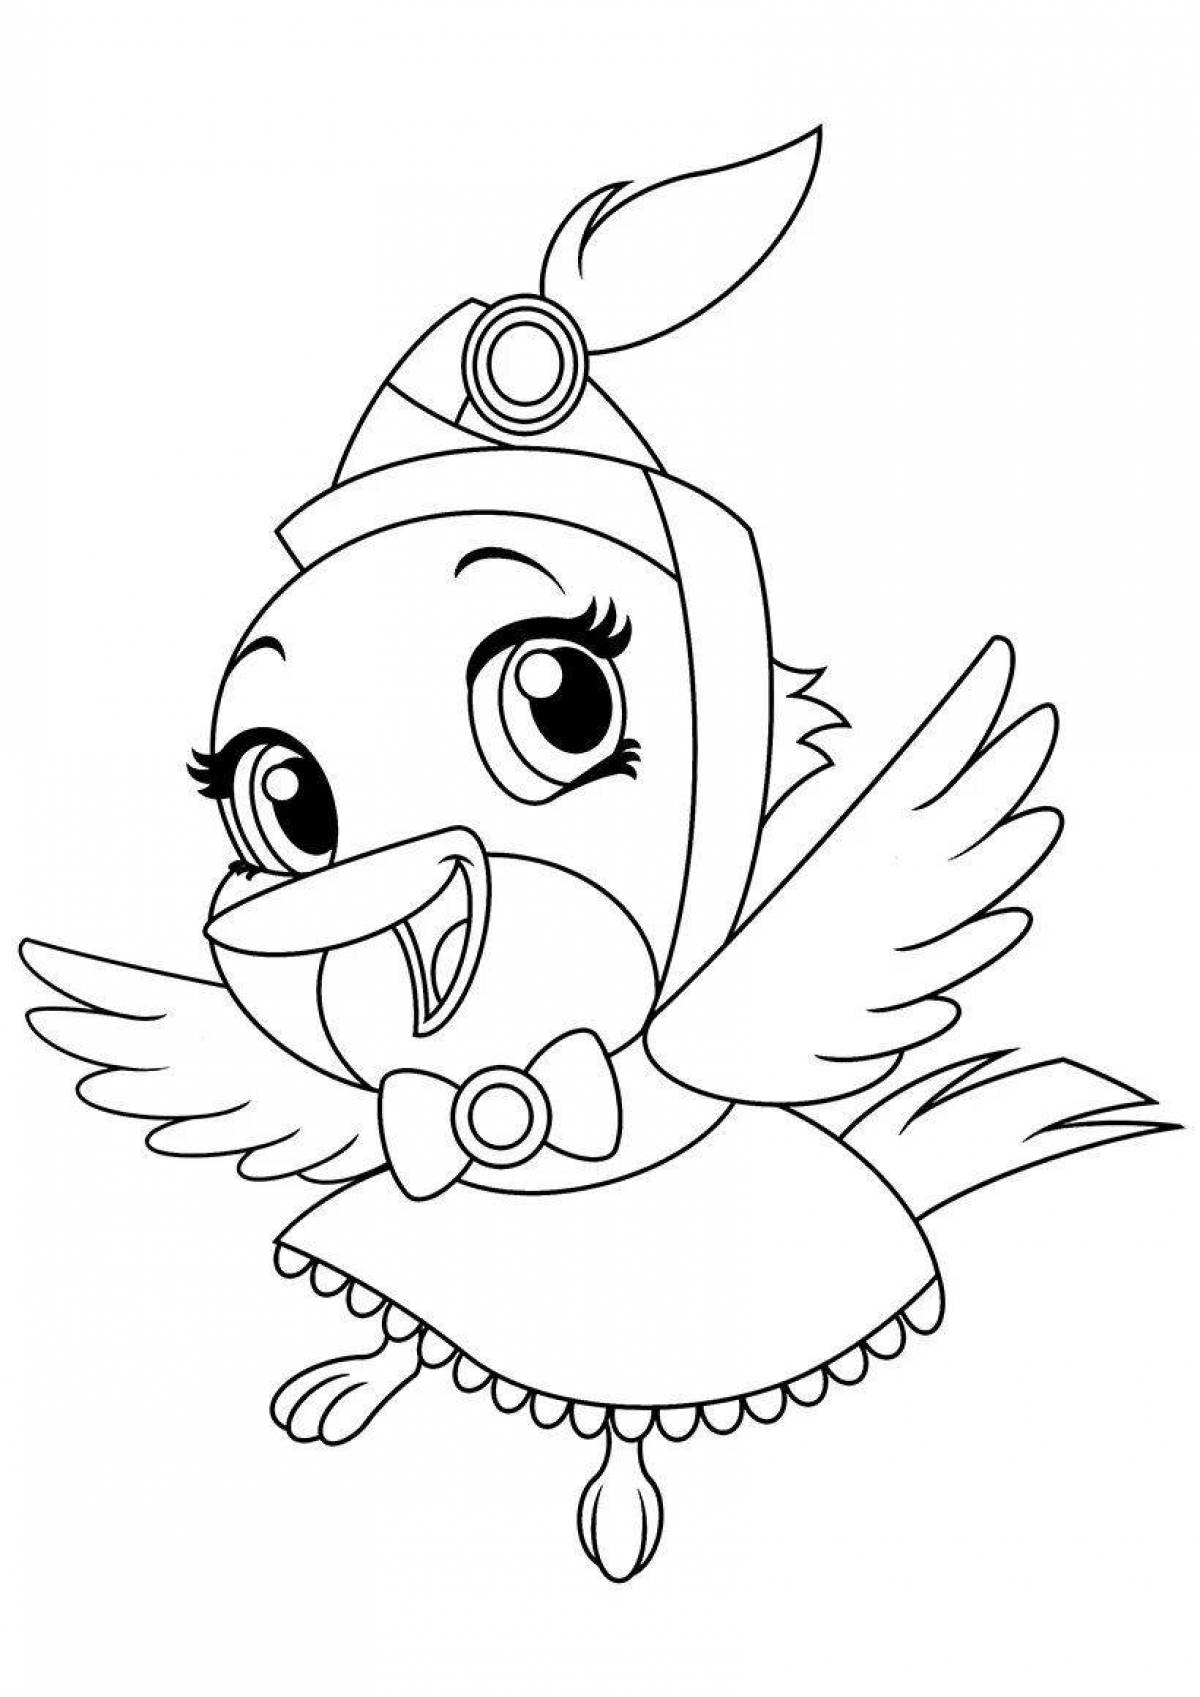 Lovely enchalchimulz coloring page